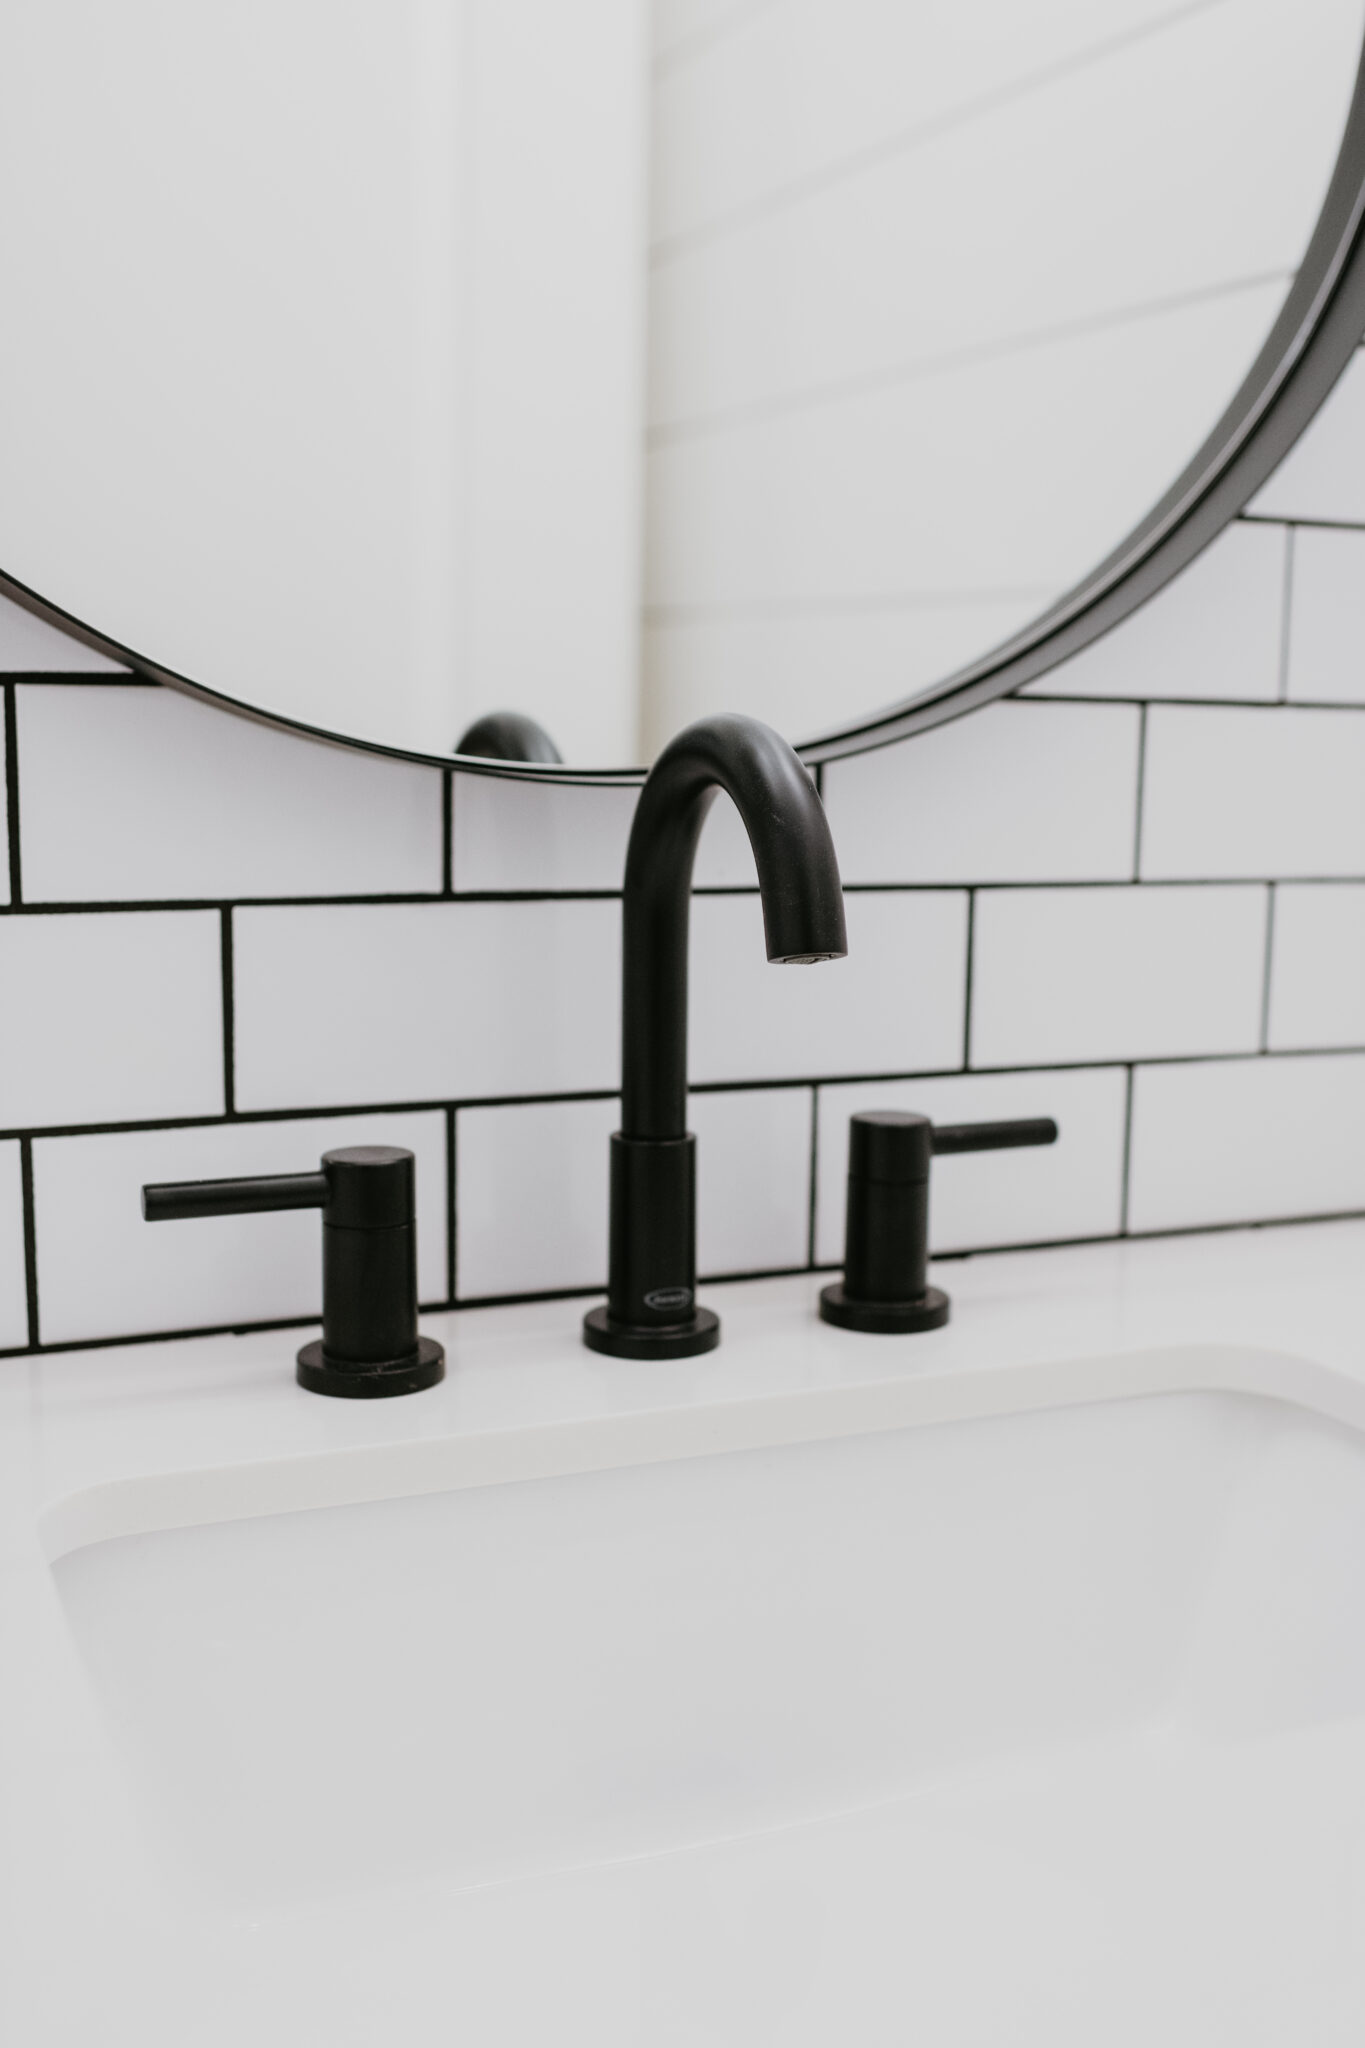 Modern Farmhouse Bathroom Decor Ideas featured by top Las Vegas lifestyle blogger, Outfits & Outings